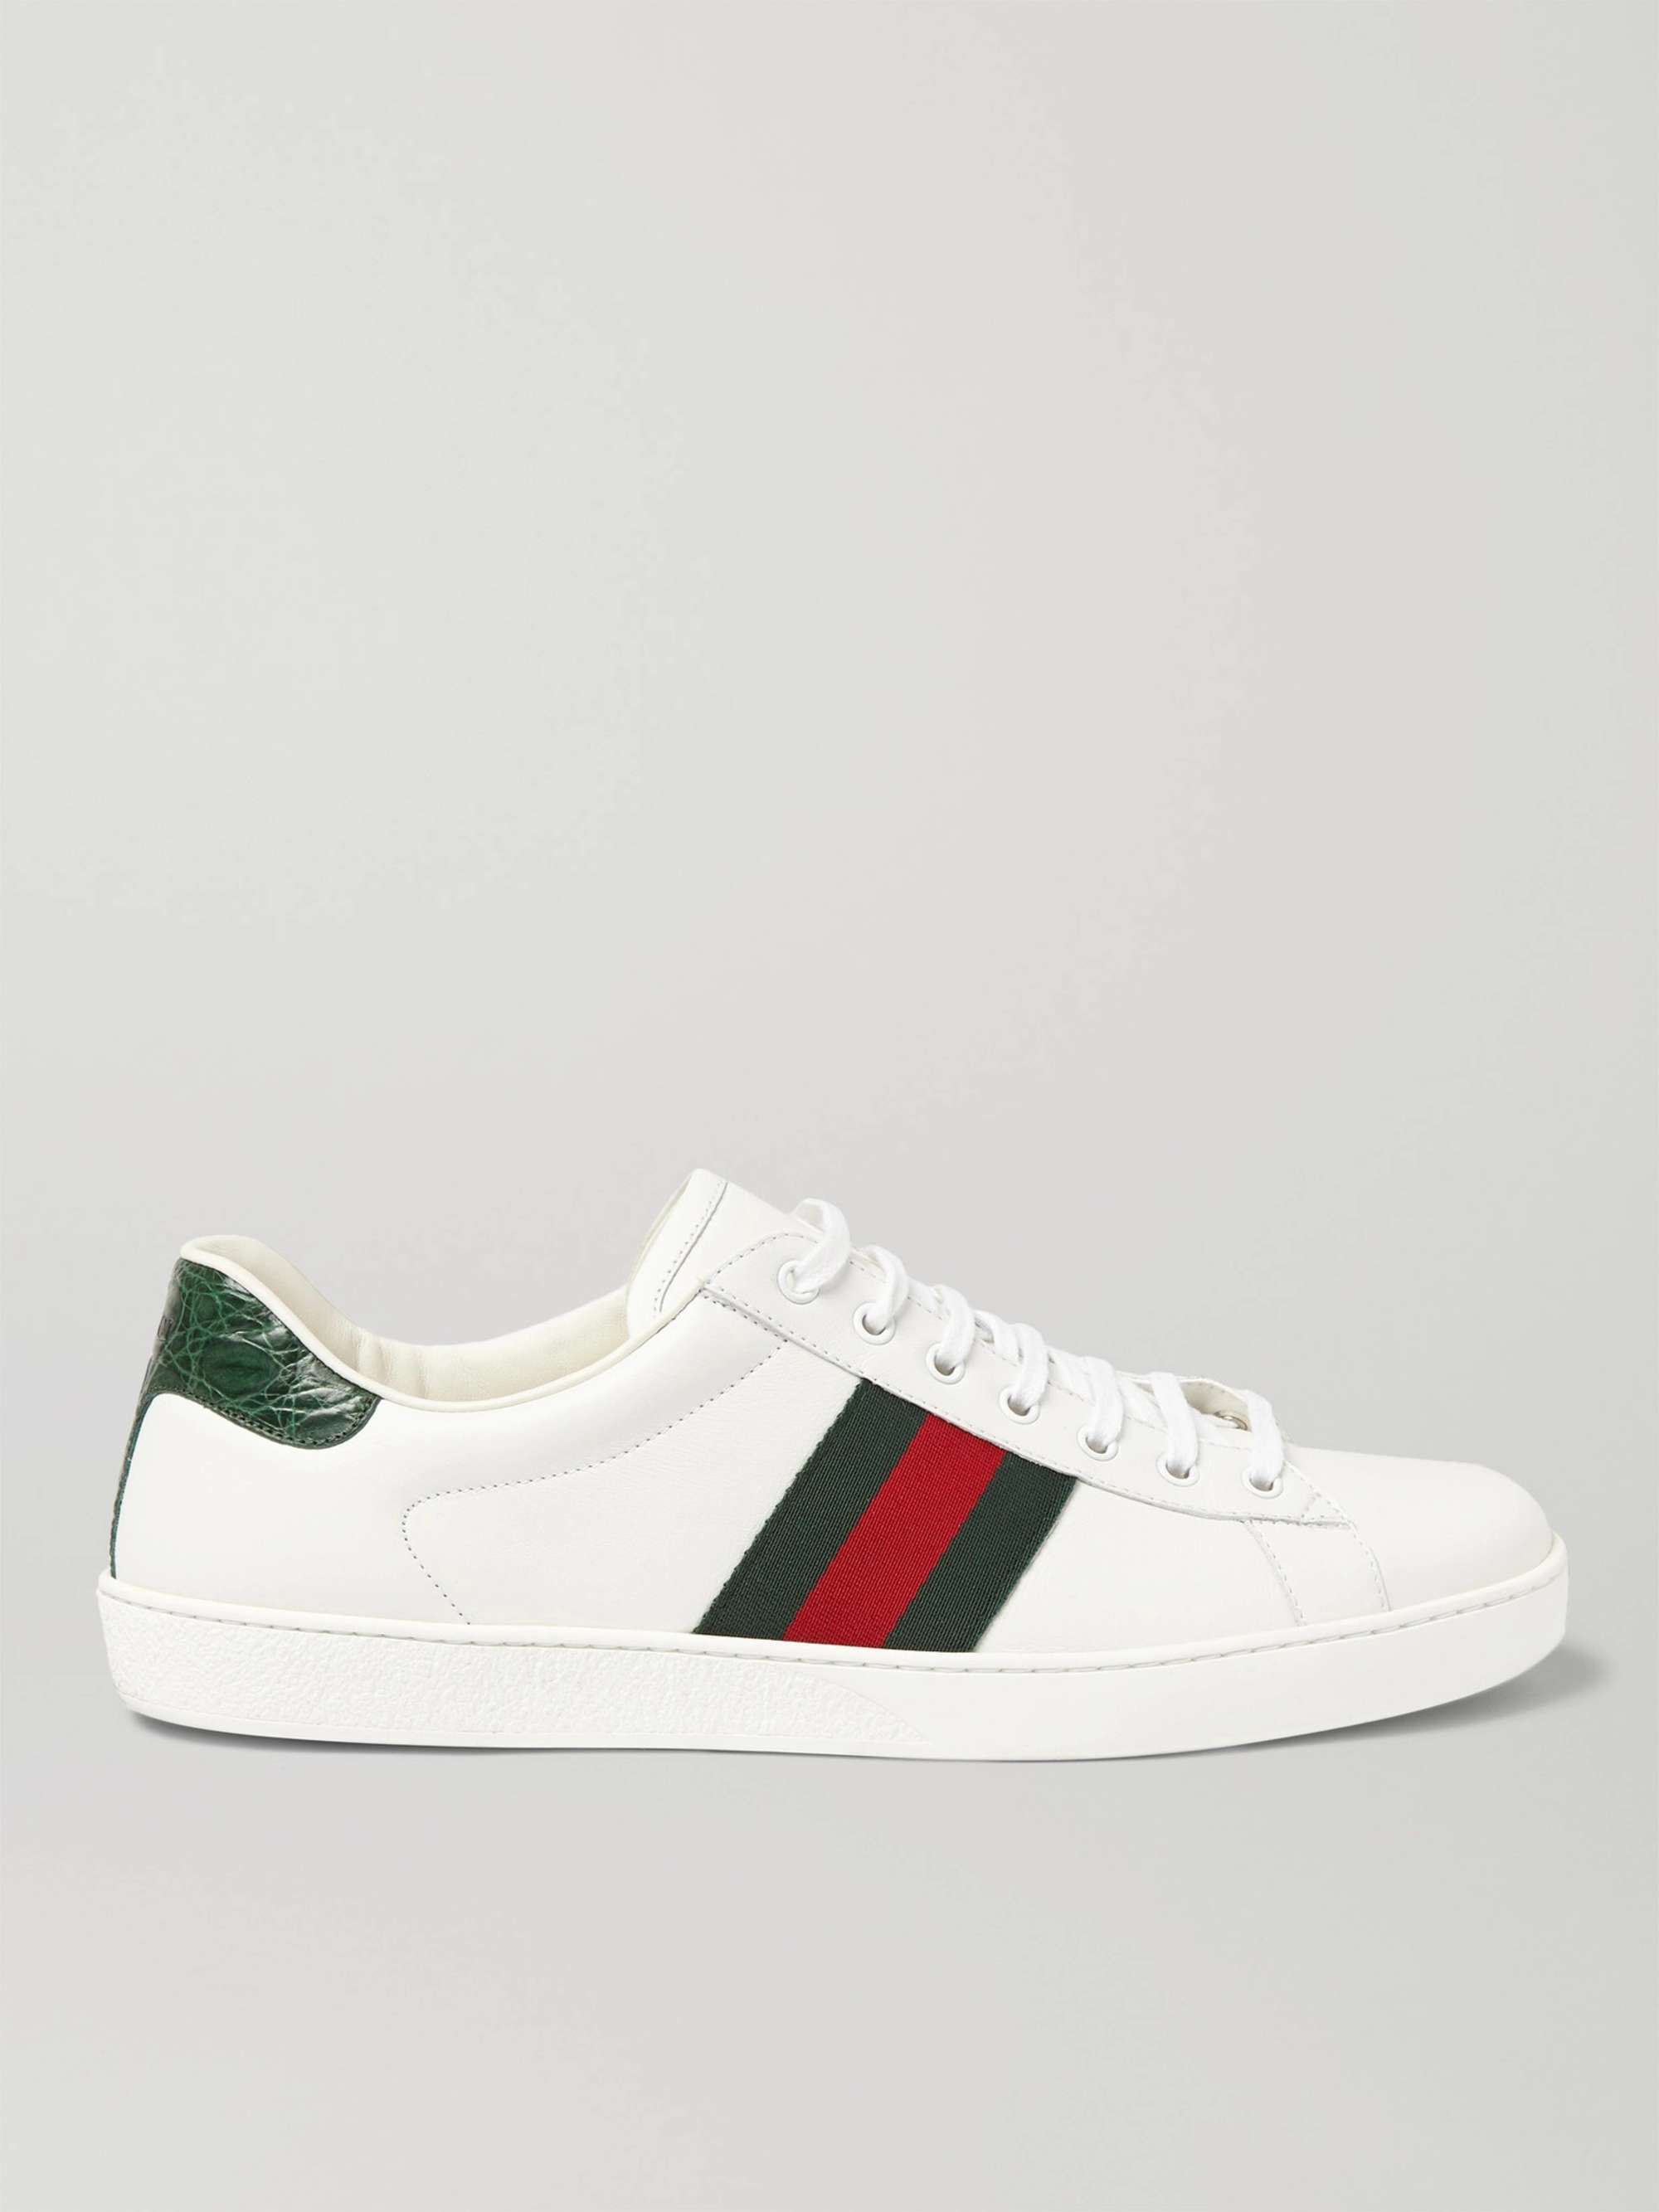 GUCCI Ace Crocodile-Trimmed Leather Sneakers for Men | MR PORTER